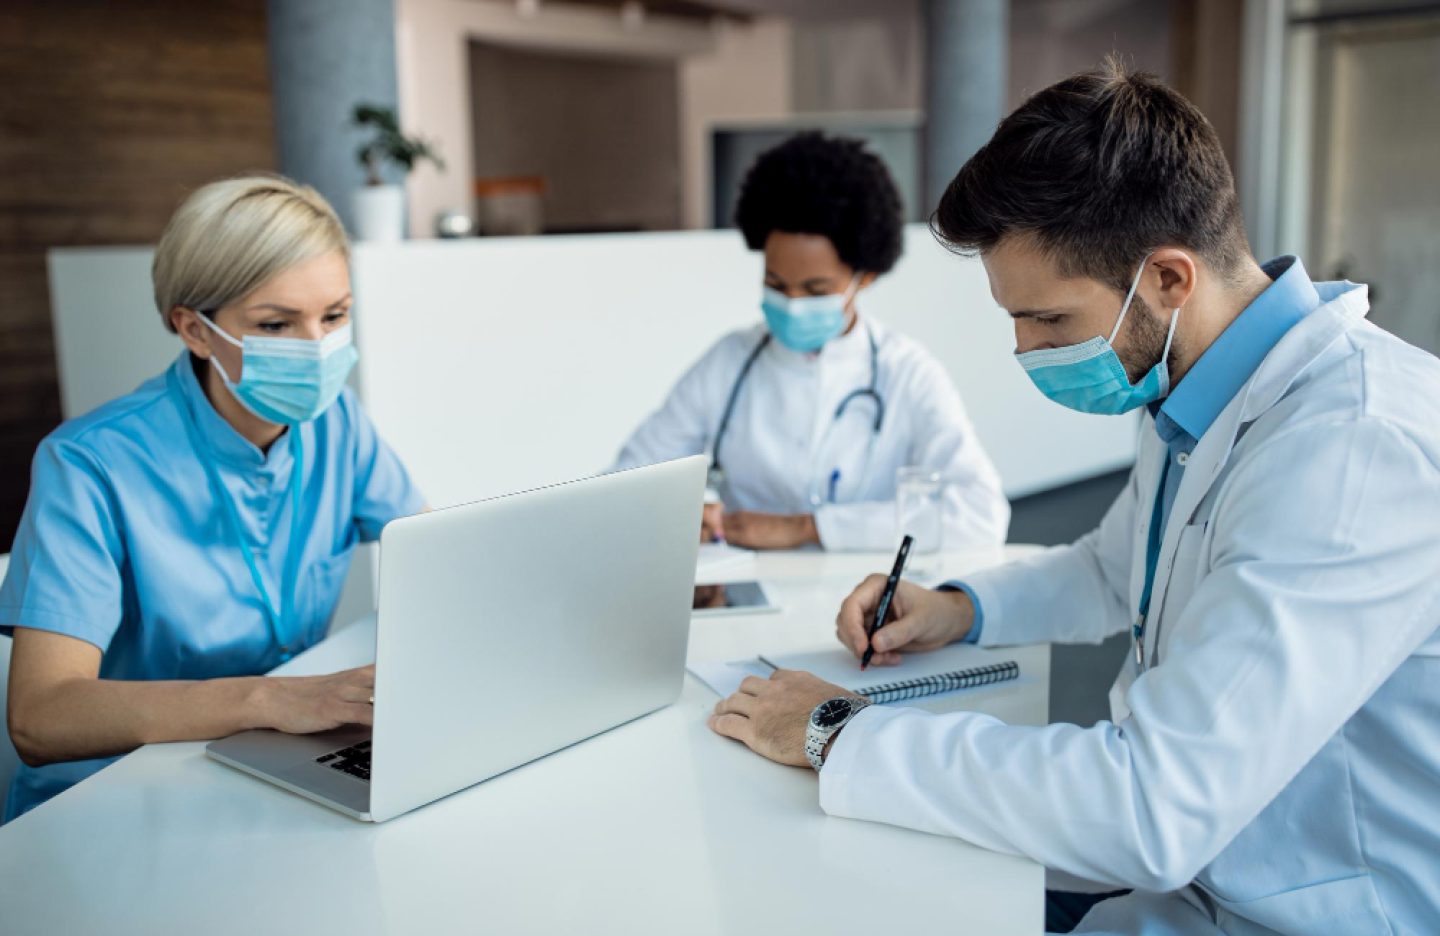 male-doctor-taking-notes-while-working-with-colleagues-medical-clinic